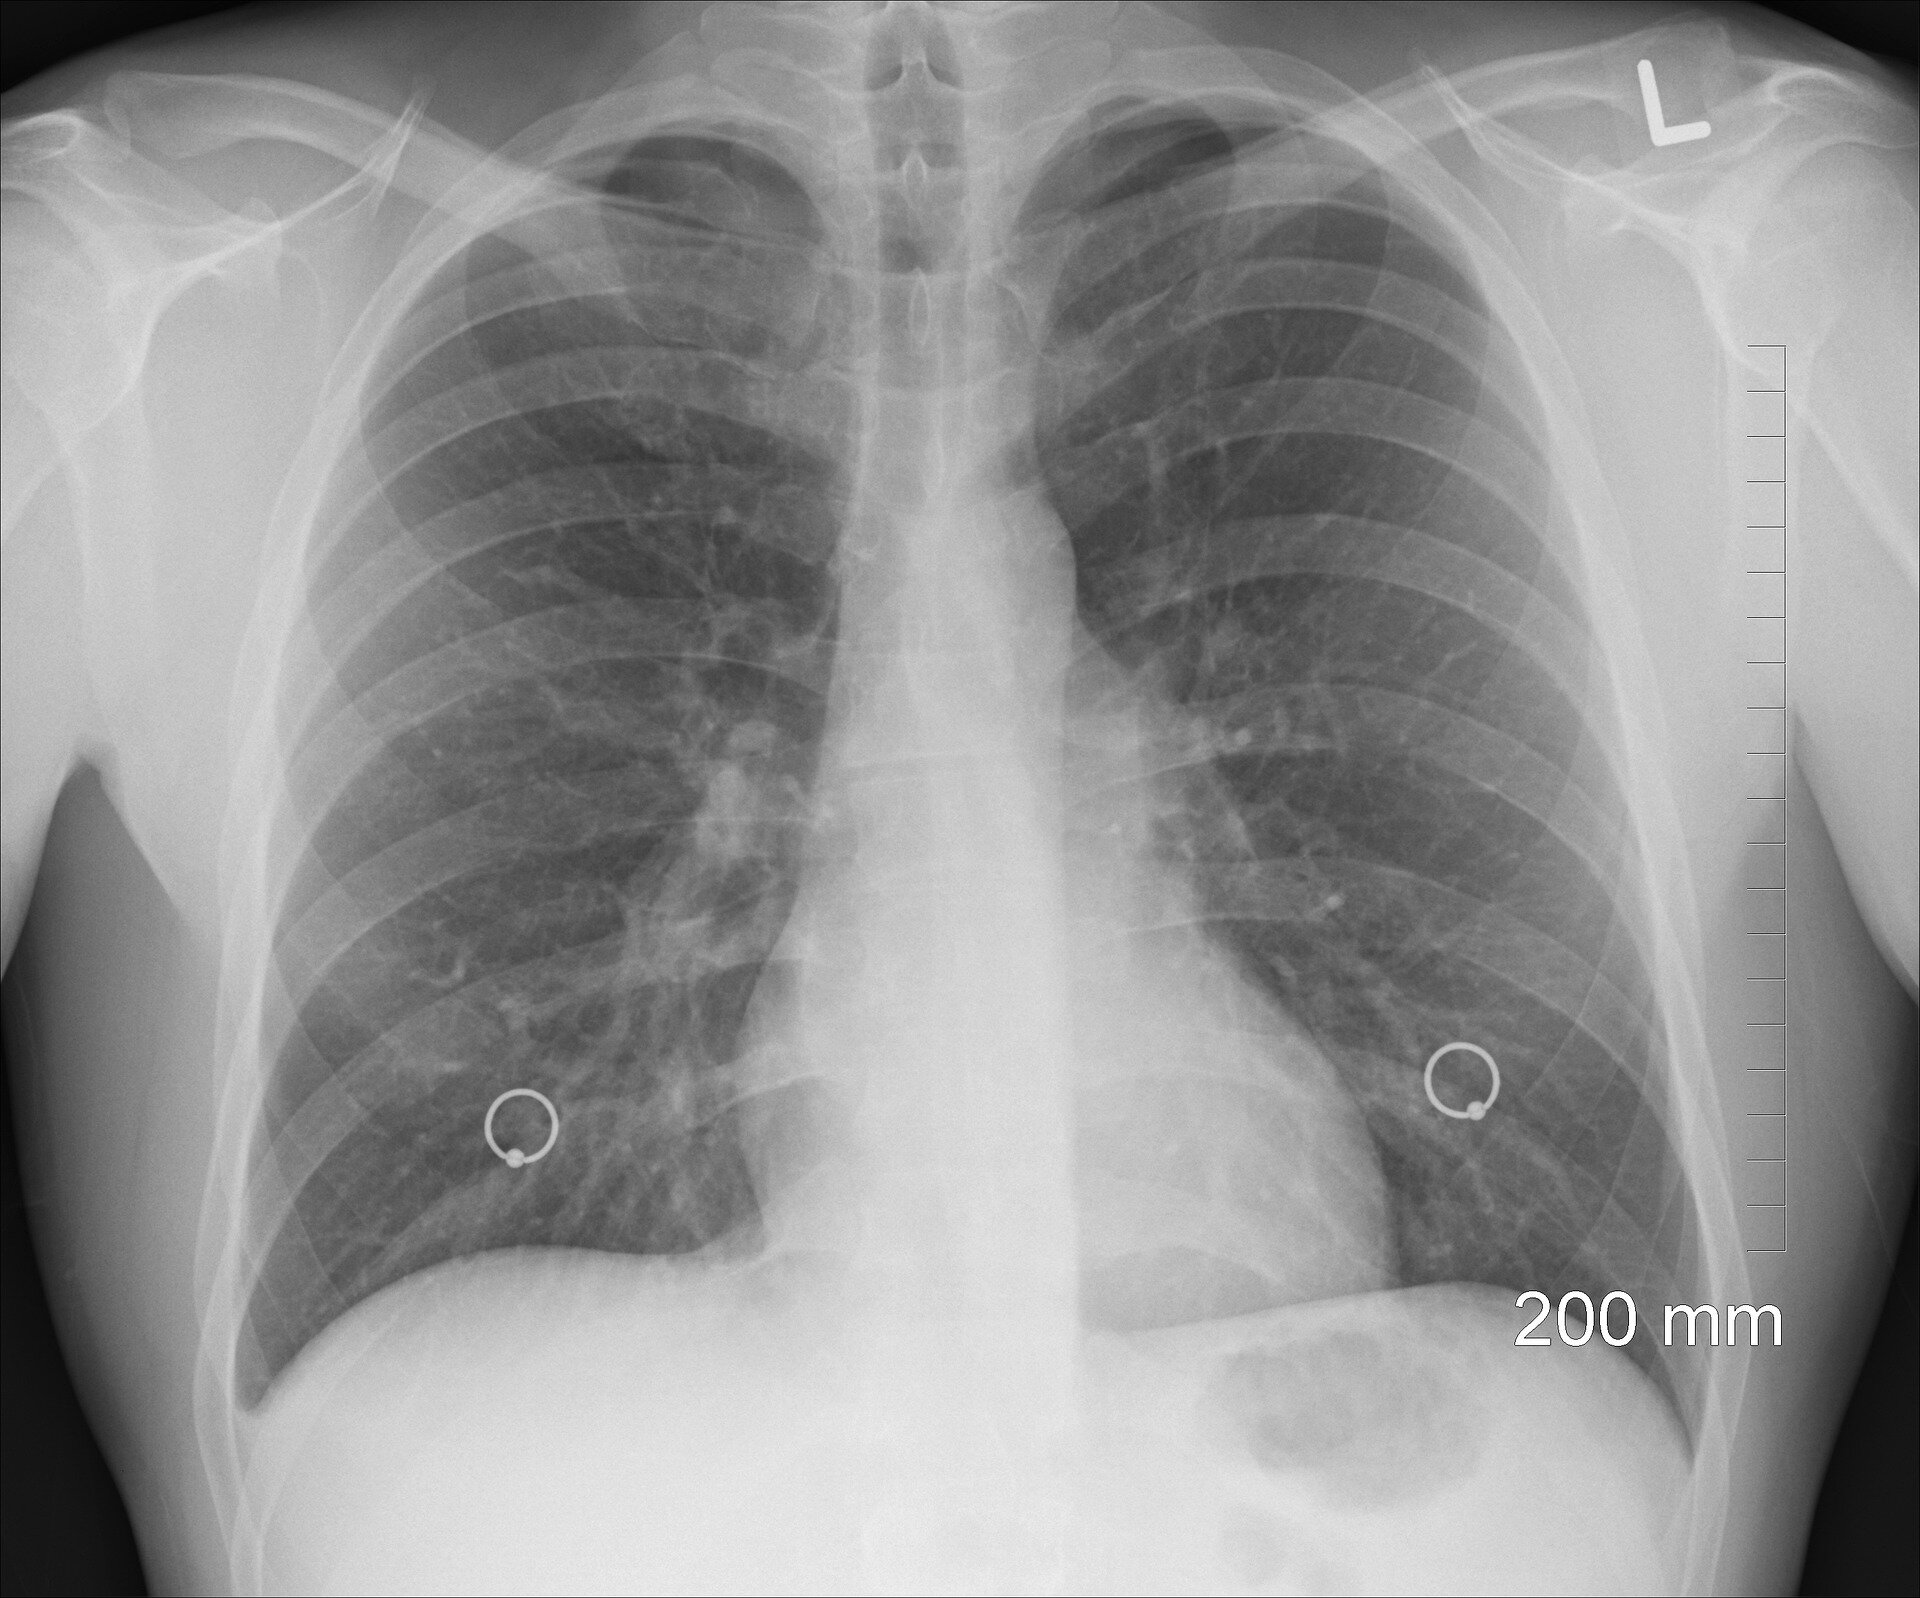 #Severe lung infection during COVID-19 can cause damage to the heart